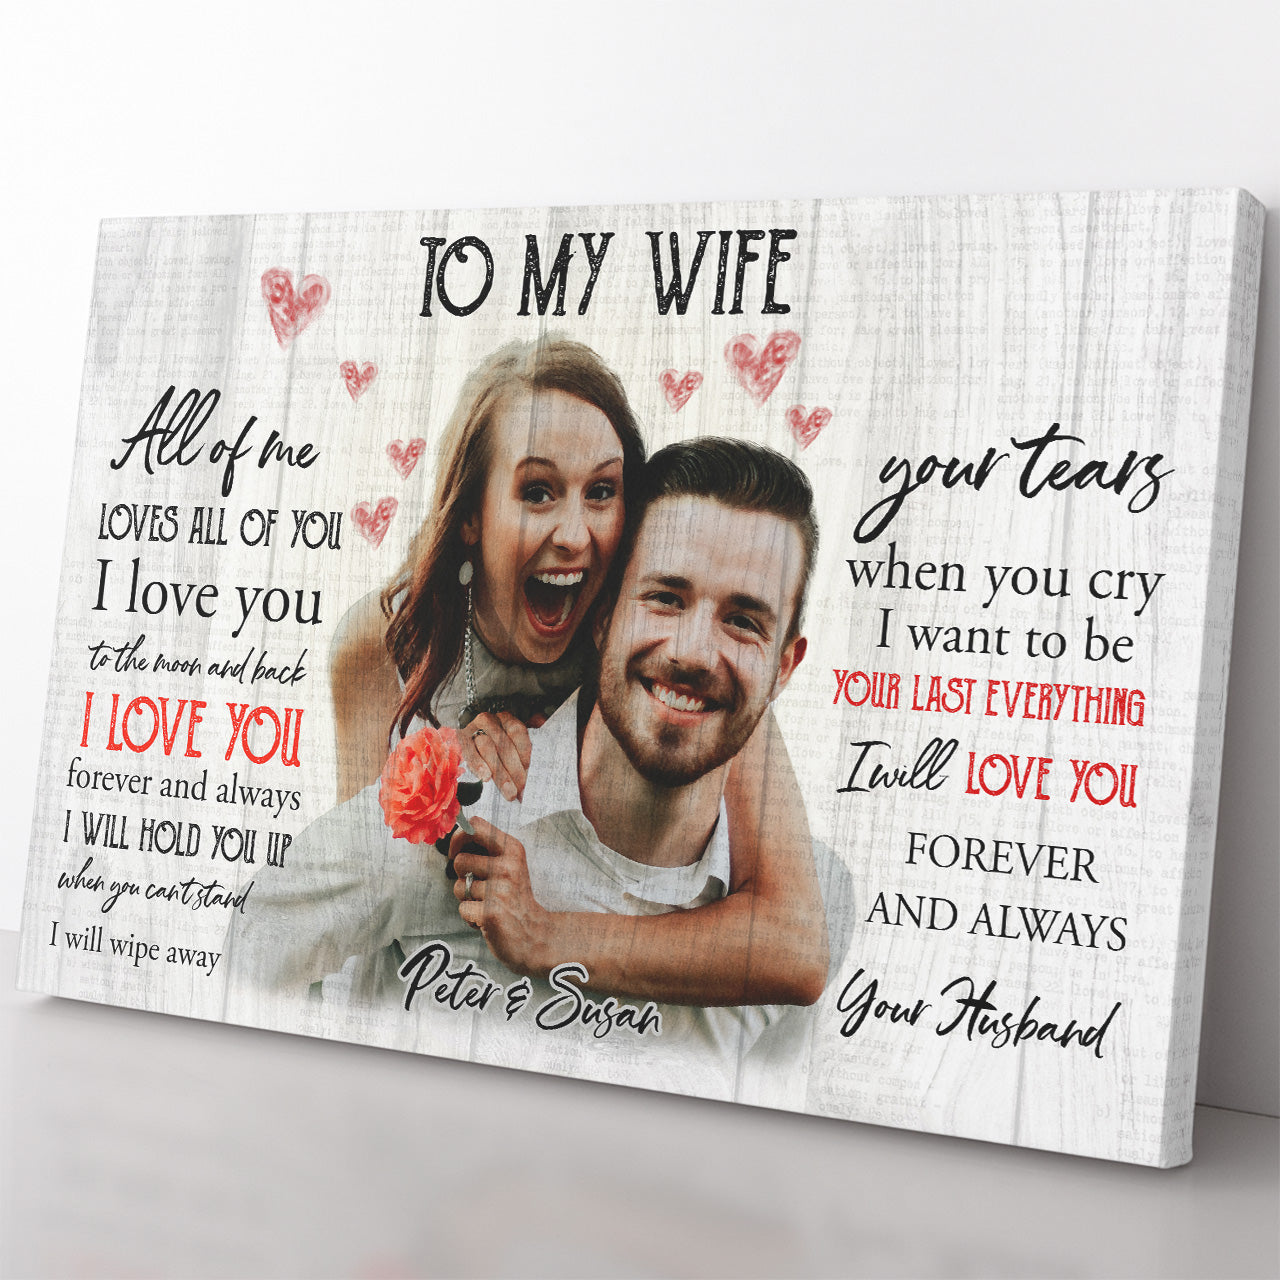 Personalized Canvas Gift Ideas to My Wife, All of Me Loves All of You 20121801